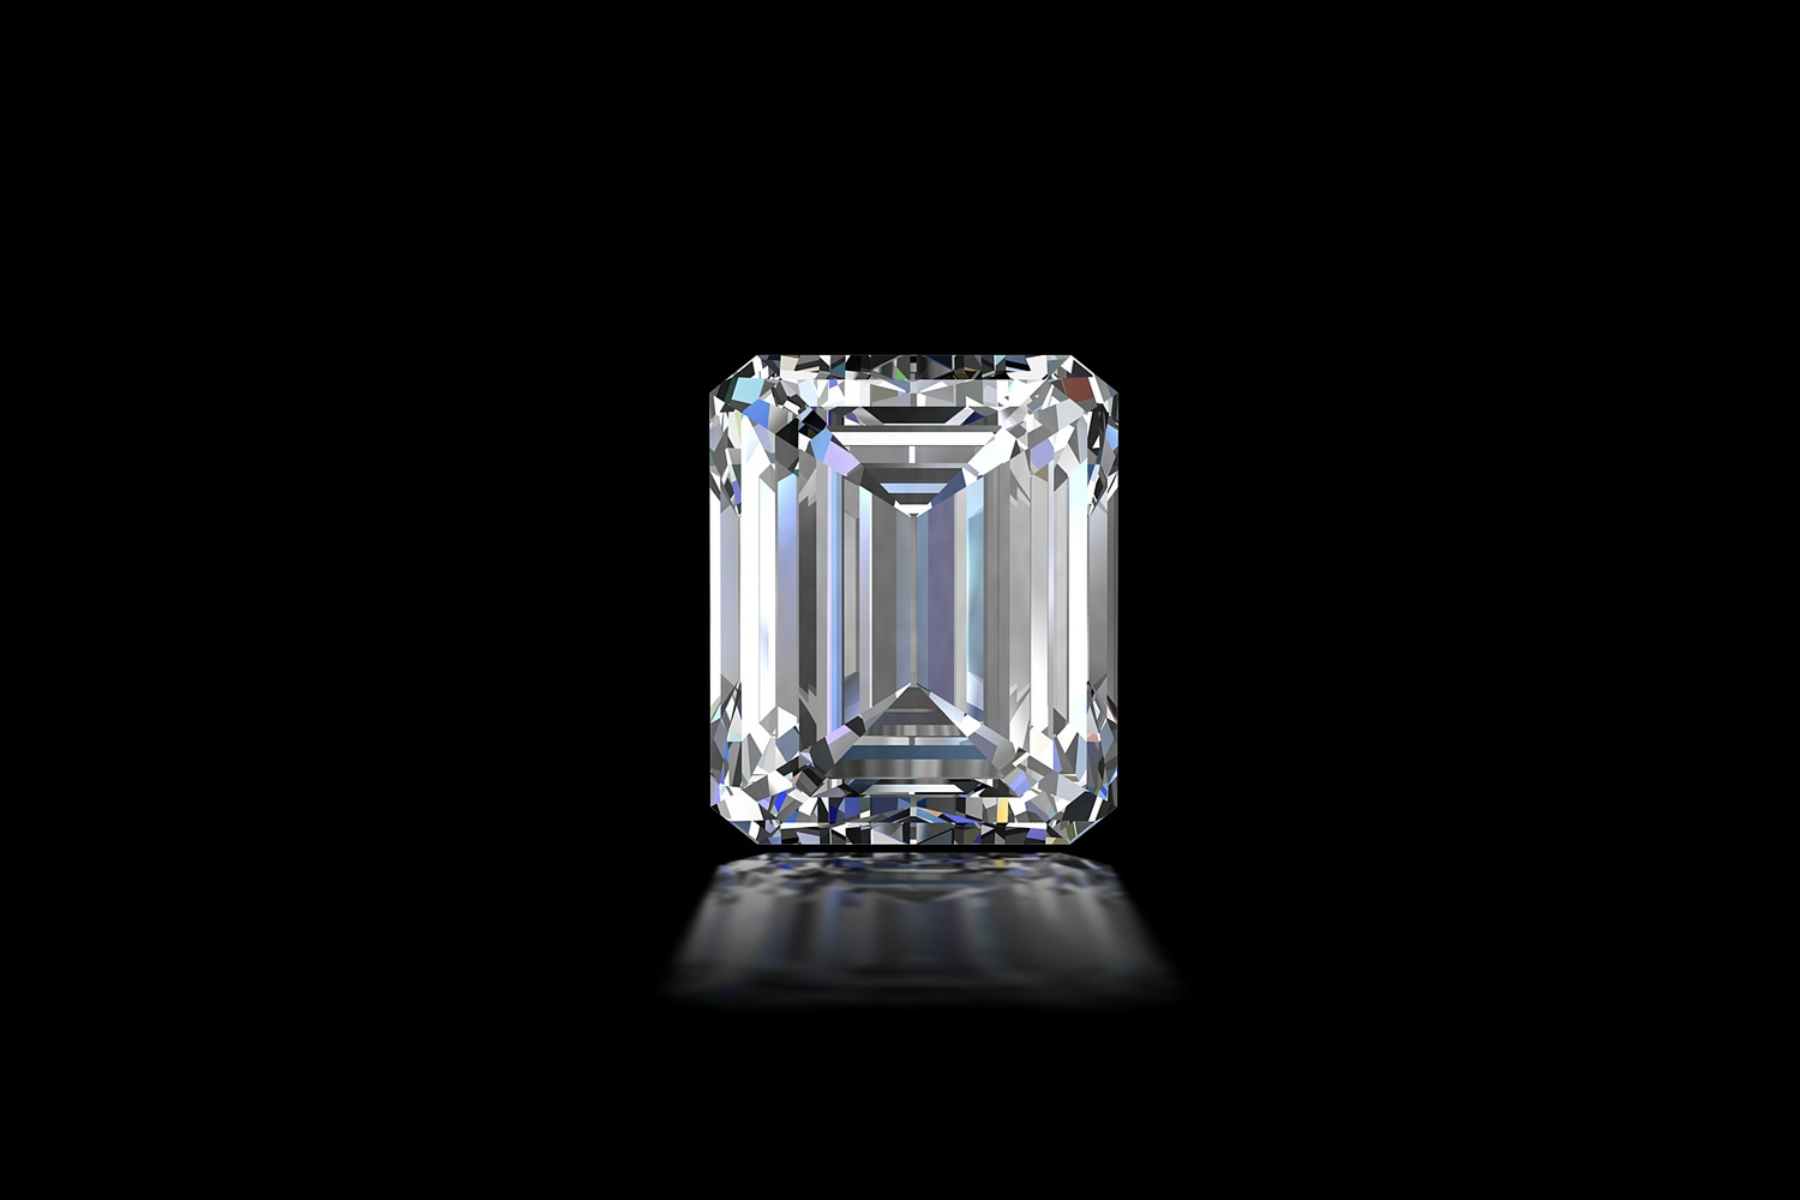 On a dark background, a white stone in an emerald cut